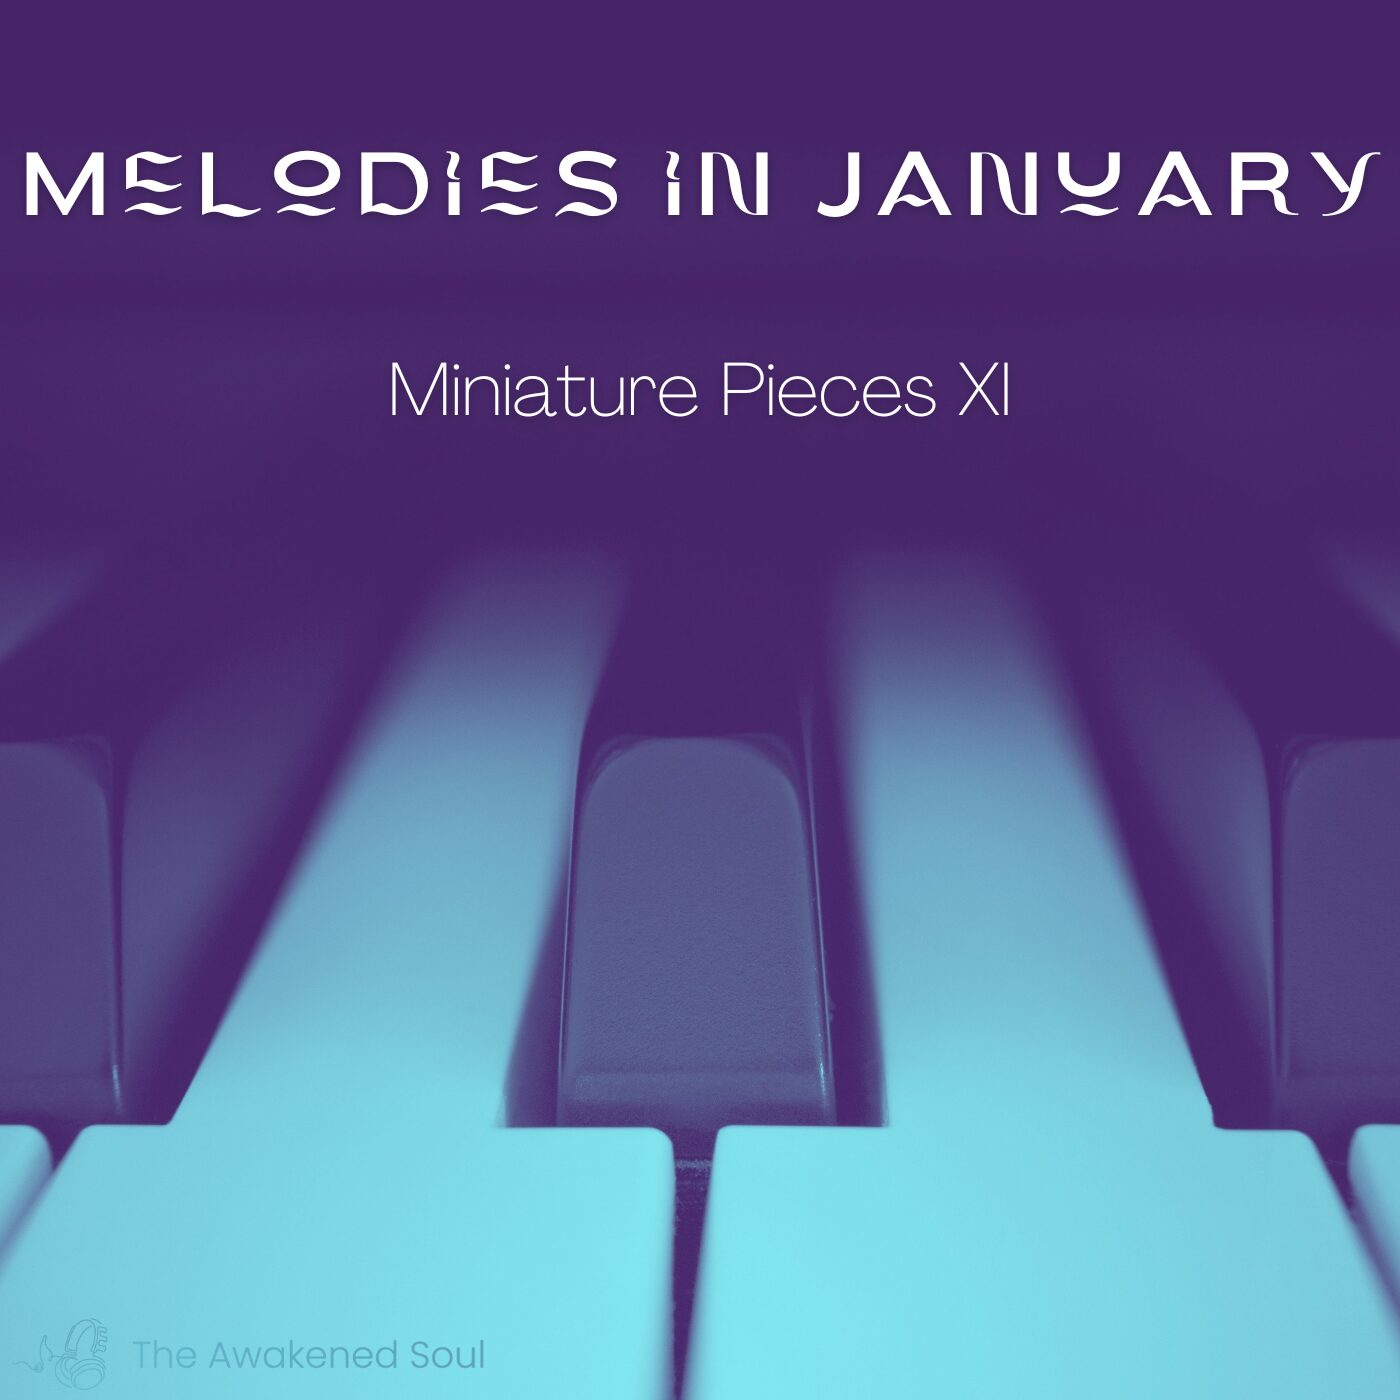 An Aqua Album Cover "Melodies in January" - Miniature Piece Project